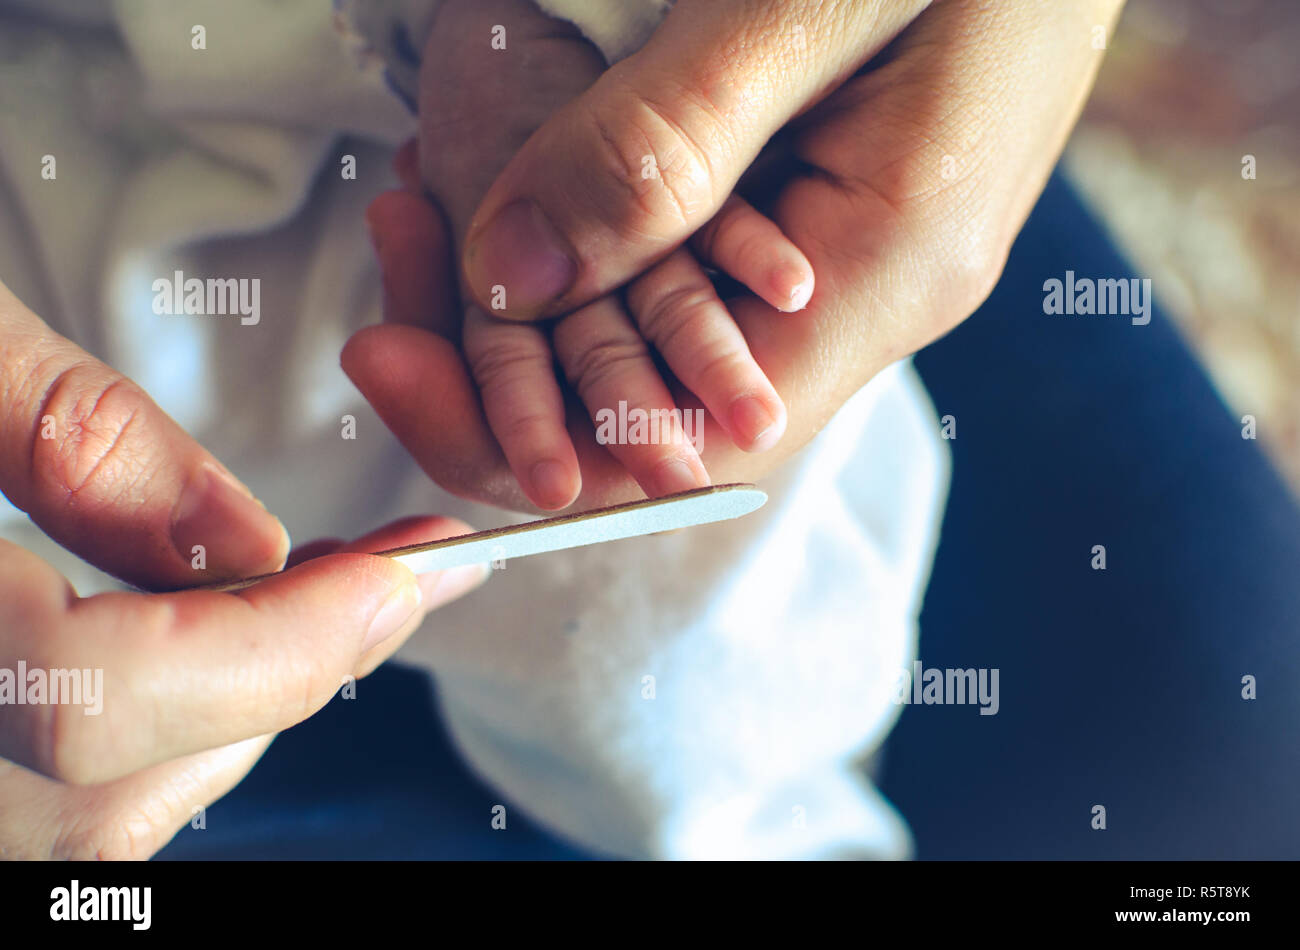 filing nails newborn avoid scratches - baby nail file cut Stock Photo